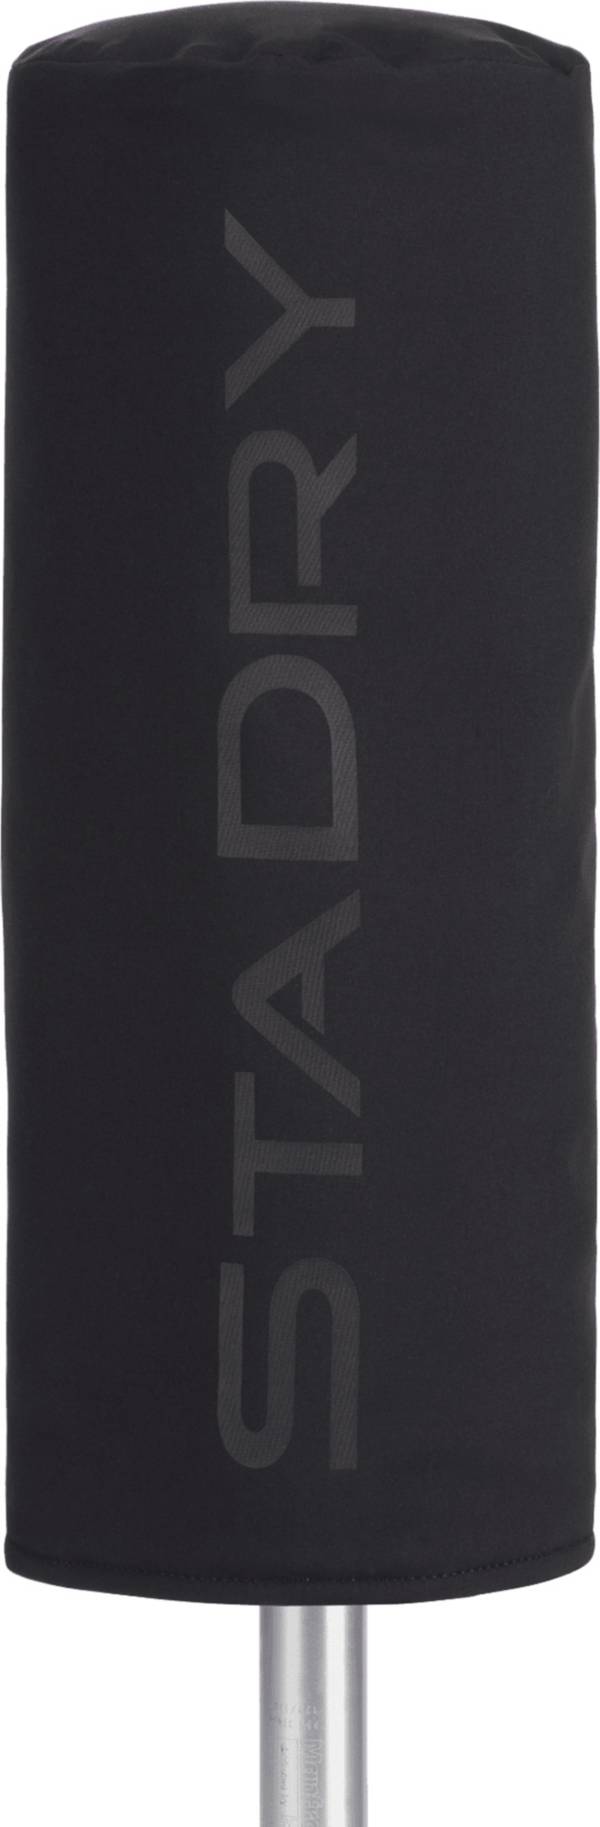 Titleist StaDry Barrel Driver Headcover product image